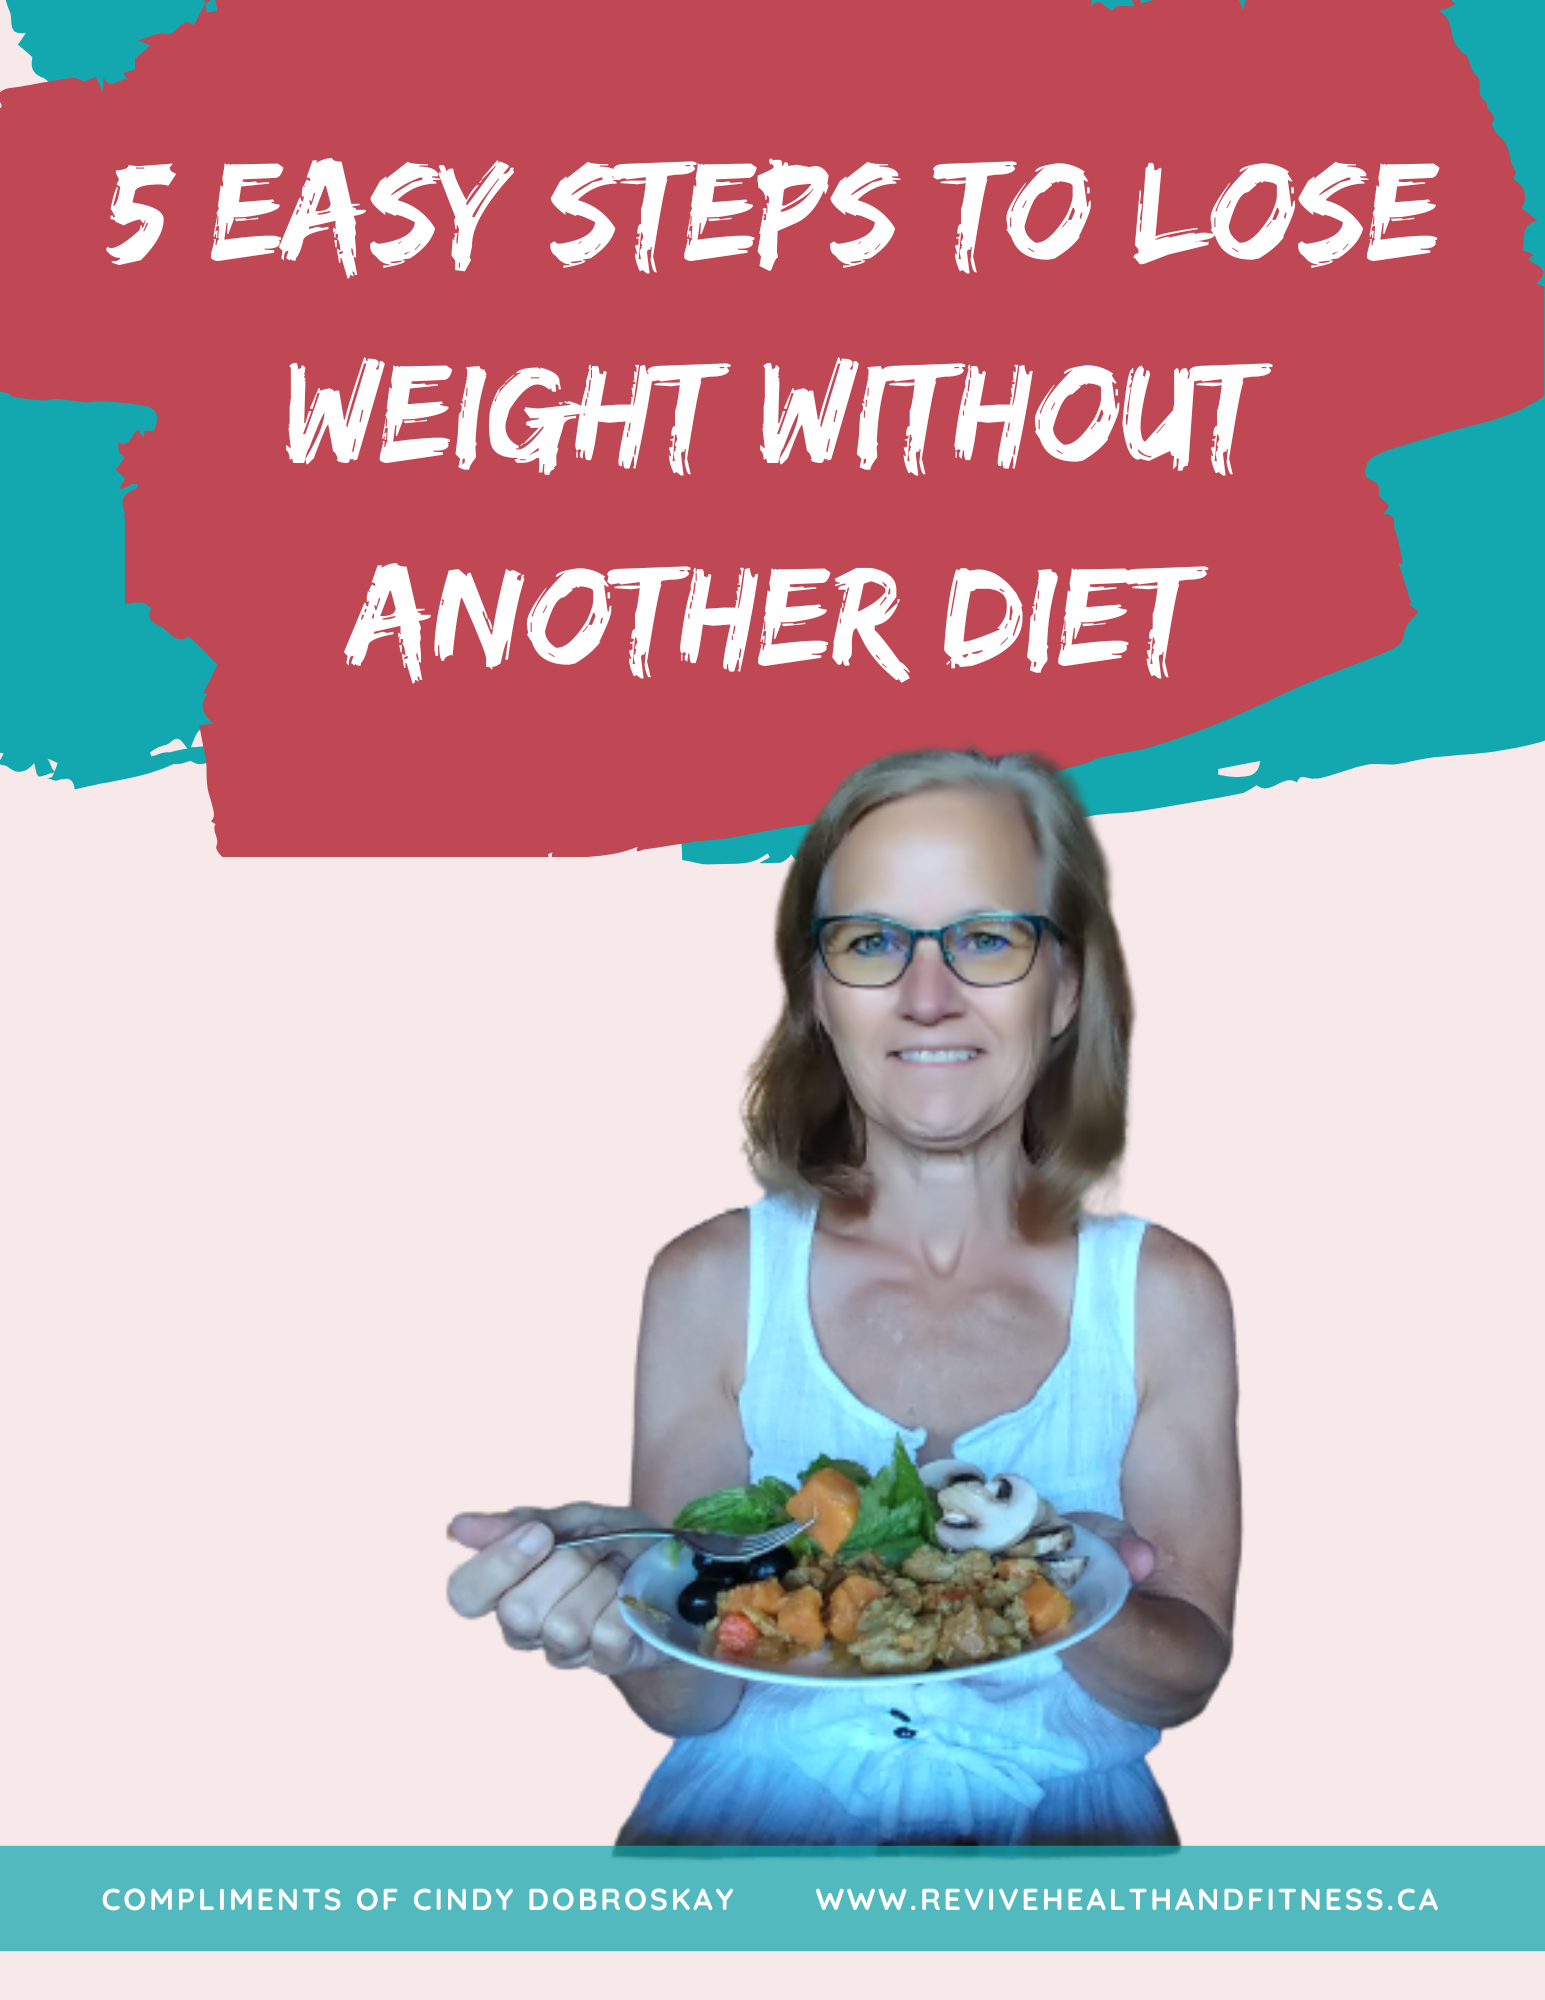 Weight Loss Made Easy without Another Diet